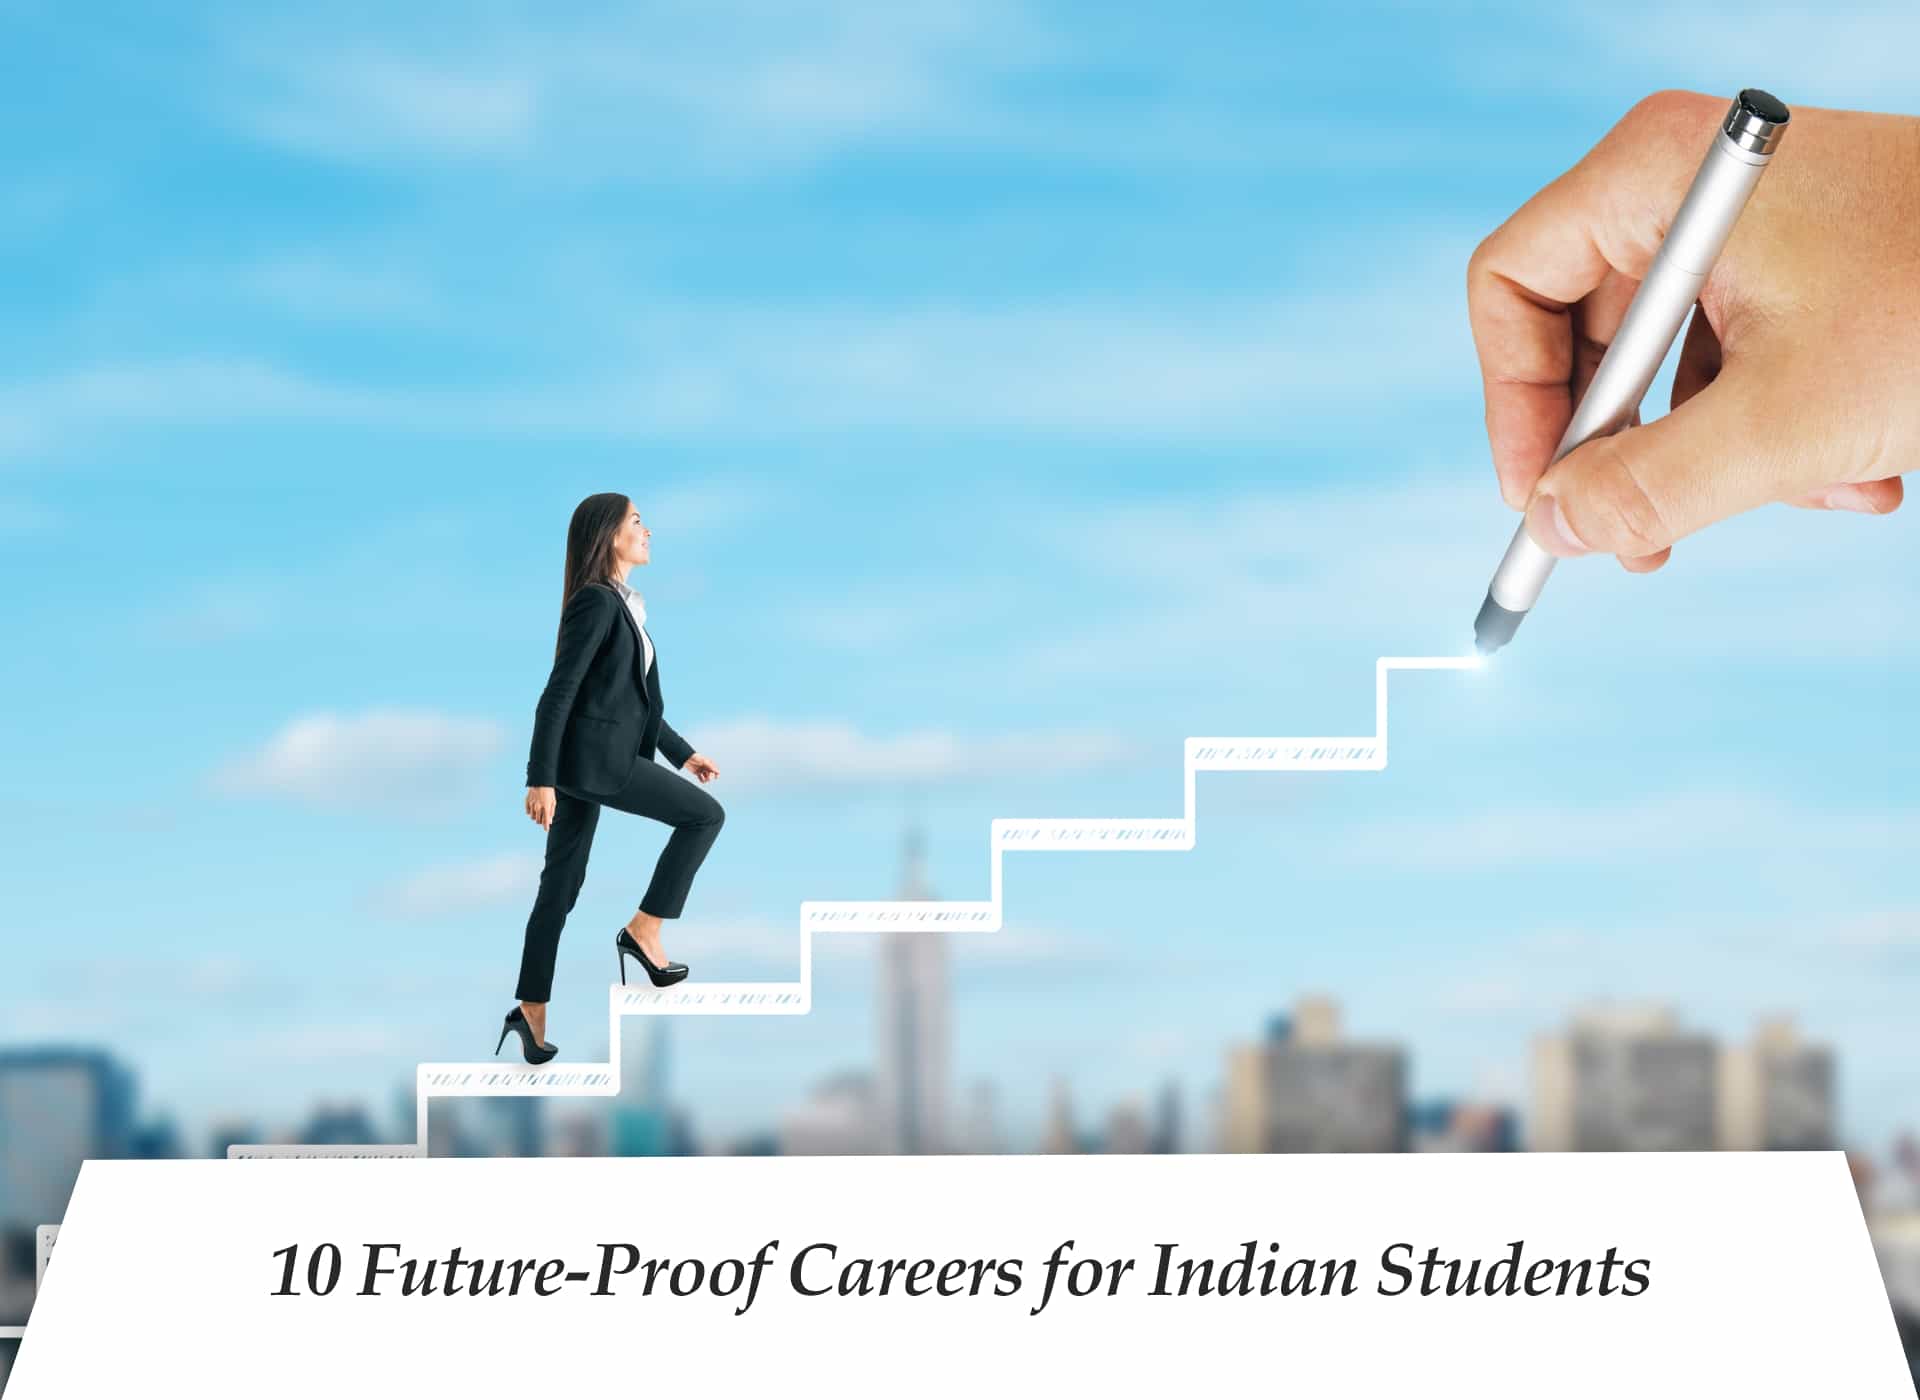 Career Options for School Students